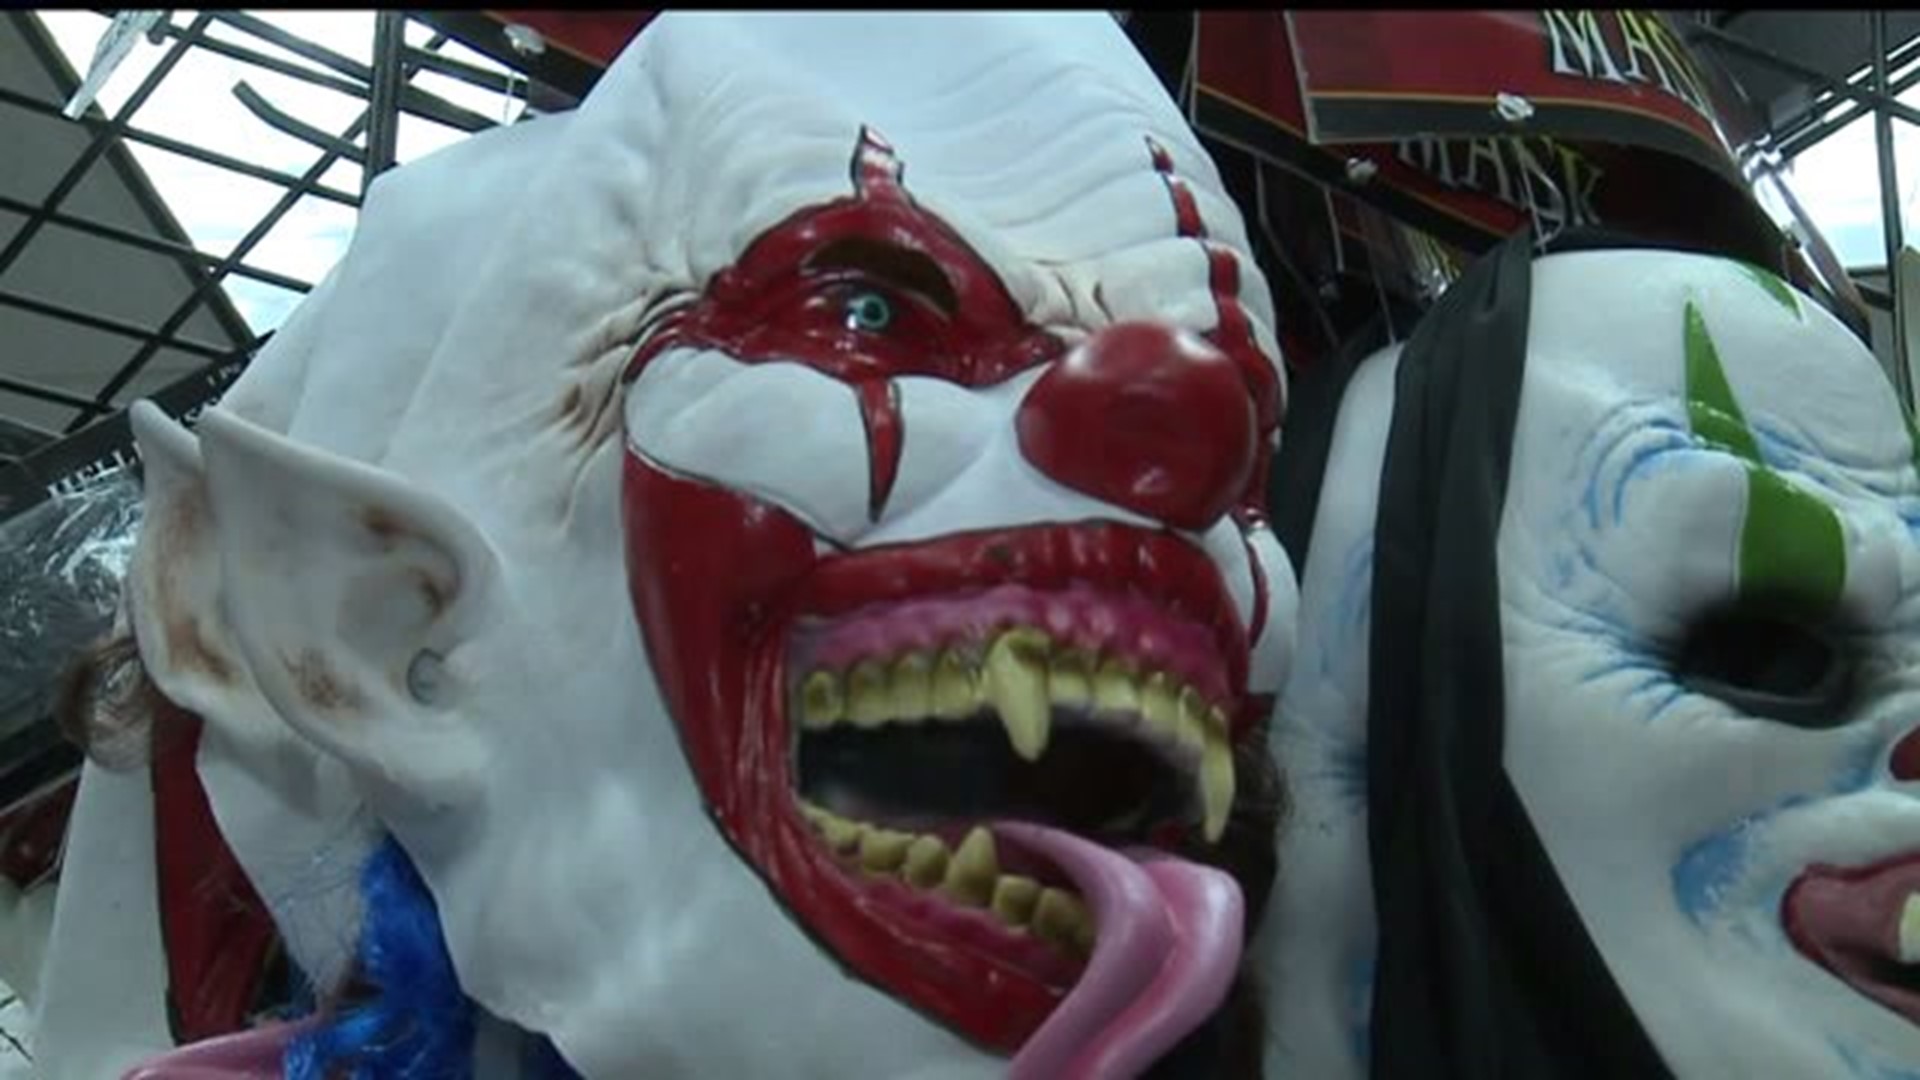 Families warned after mass clown sightings in Lancaster County